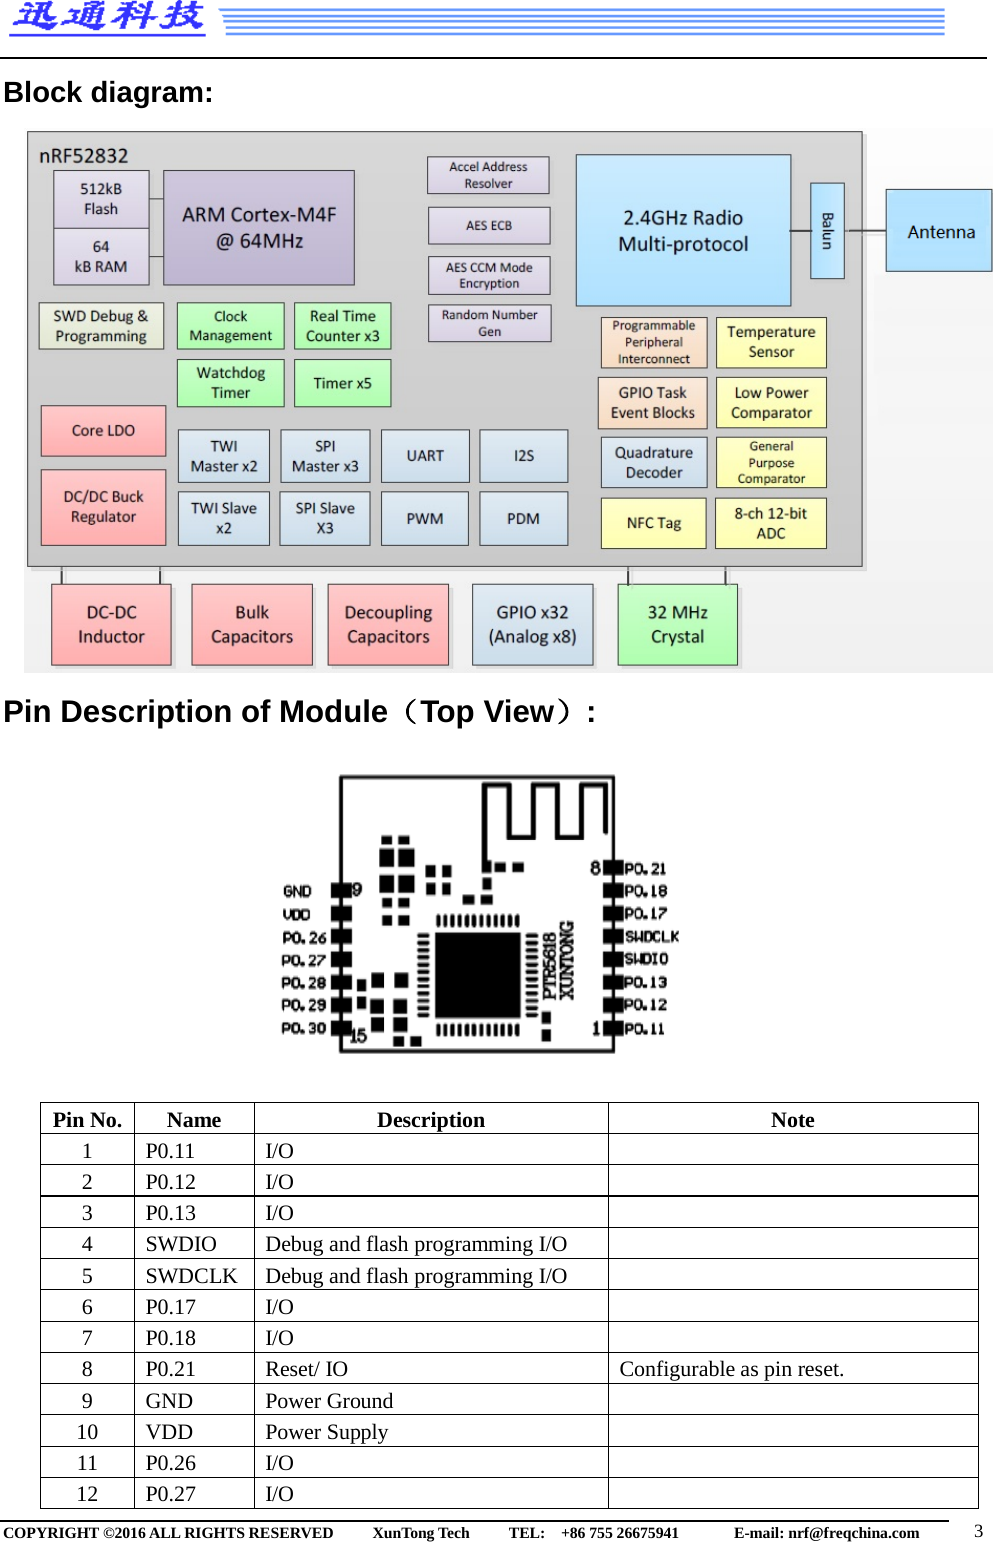  Block diagram:   Pin Description of Module（Top View）:            Pin No. Name Description Note 1 P0.11 I/O  2 P0.12 I/O  3 P0.13 I/O  4 SWDIO Debug and flash programming I/O  5 SWDCLK Debug and flash programming I/O  6 P0.17 I/O  7 P0.18   I/O  8 P0.21 Reset/ IO Configurable as pin reset.   9 GND Power Ground  10 VDD Power Supply  11 P0.26 I/O  12 P0.27 I/O  COPYRIGHT ©2016 ALL RIGHTS RESERVED      XunTong Tech     TEL:  +86 755 26675941        E-mail: nrf@freqchina.com   3 